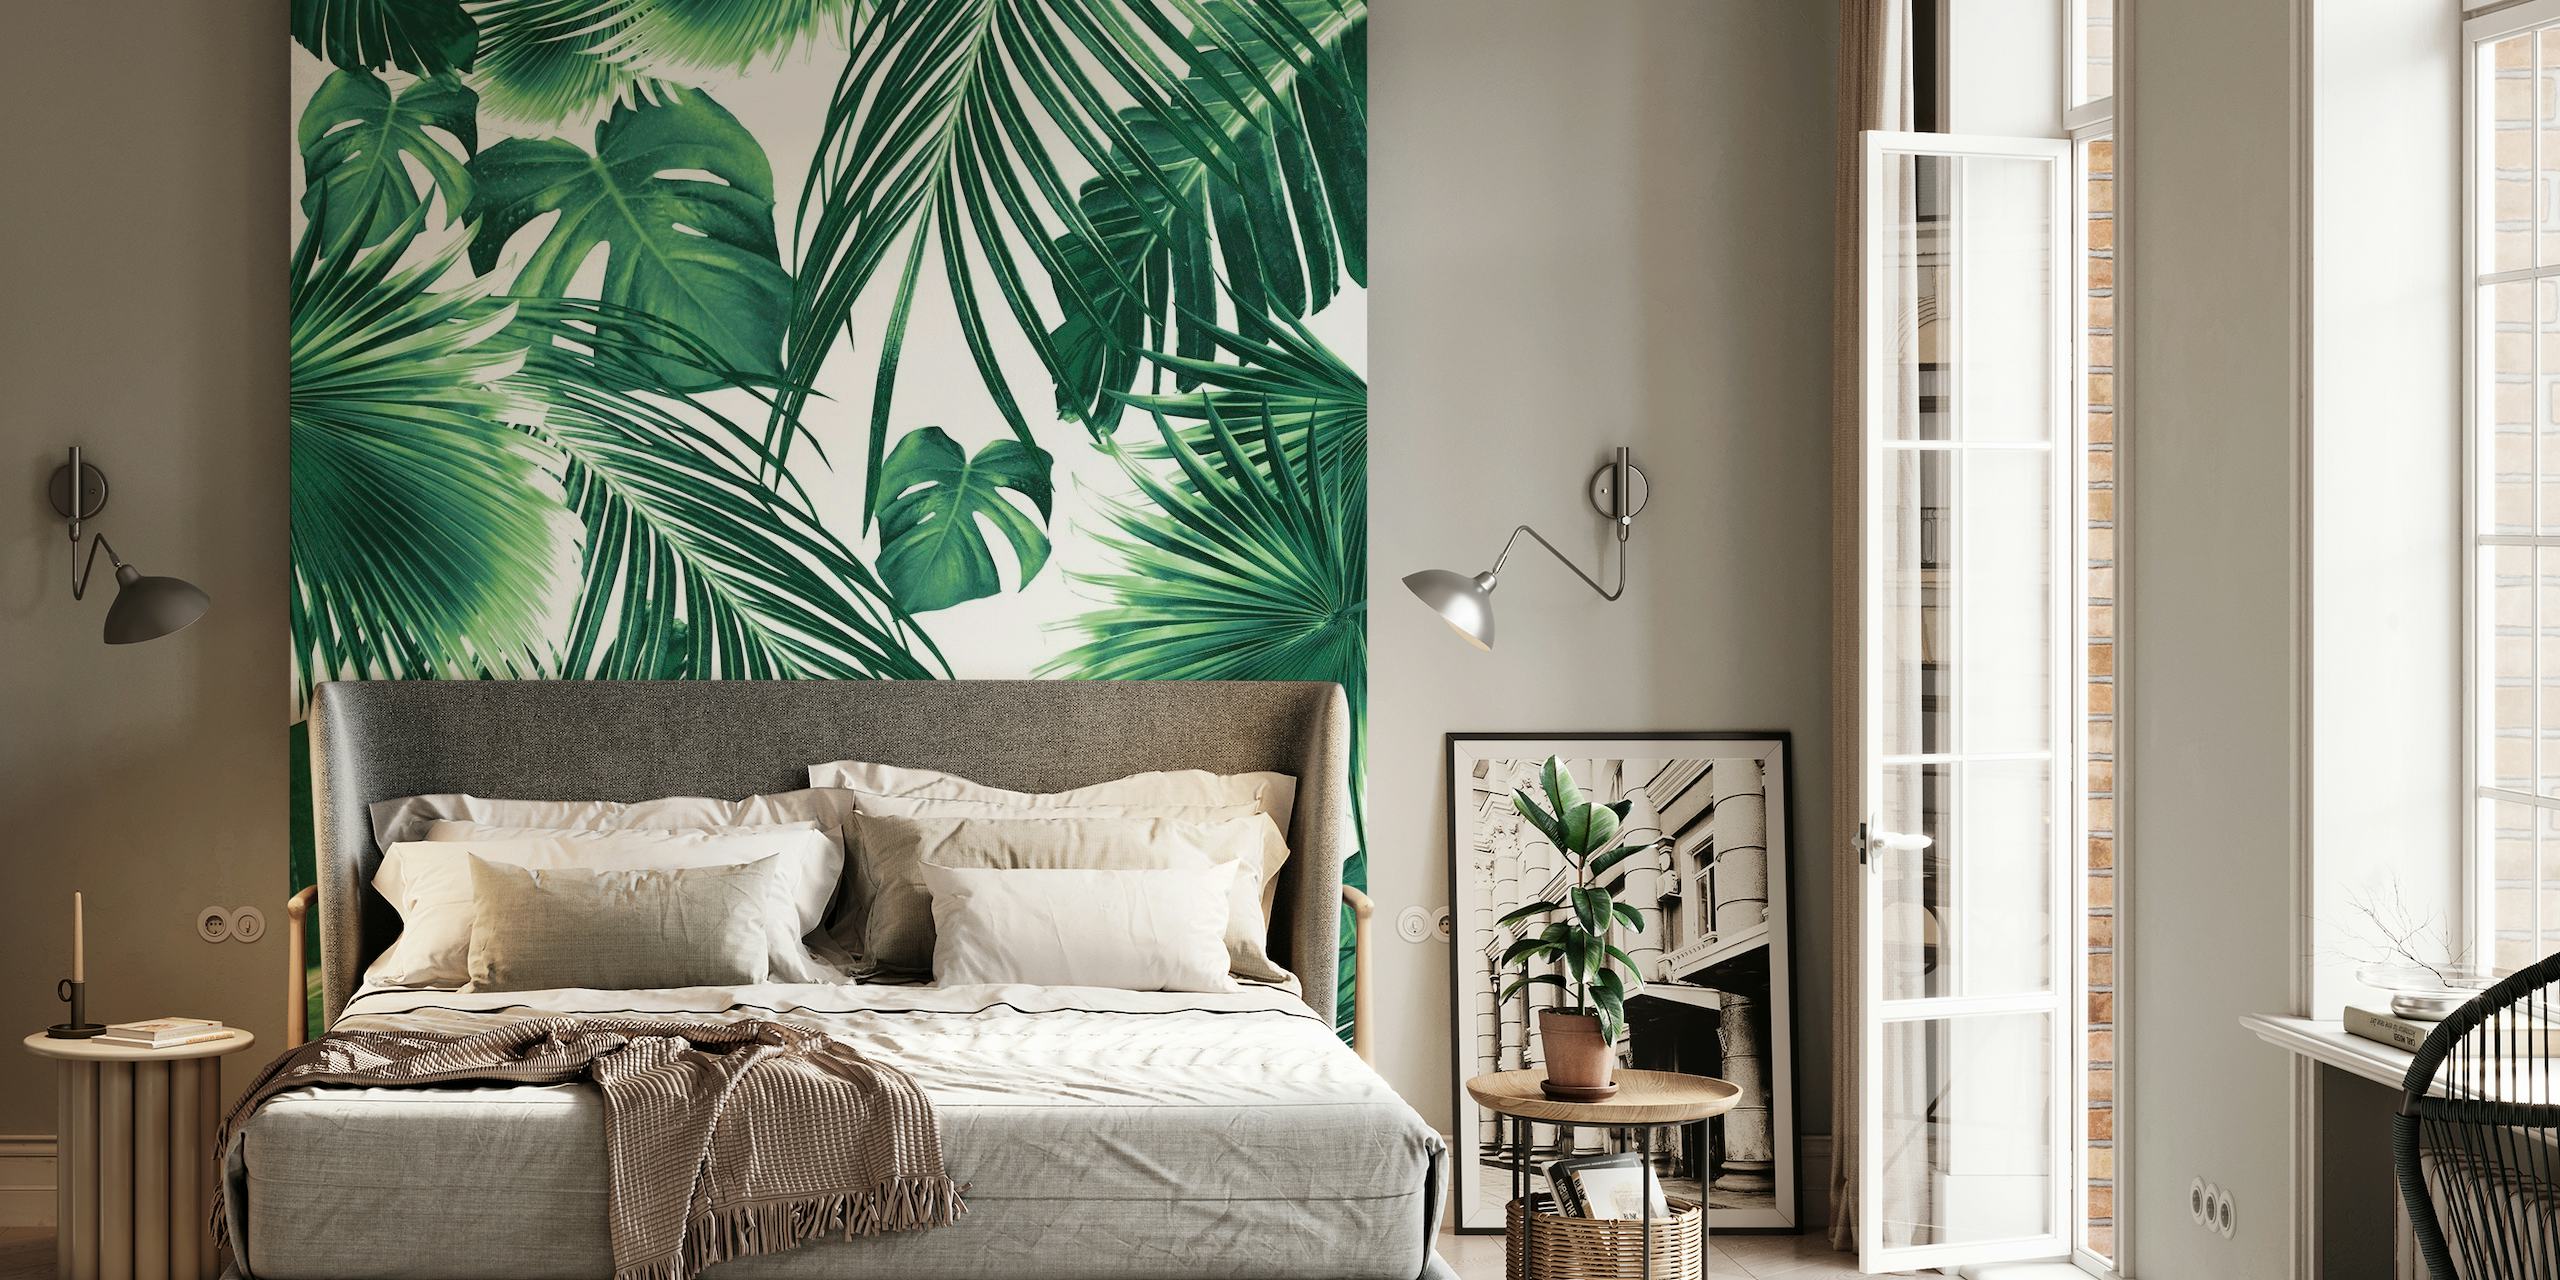 A lush wall mural with a dense pattern of tropical jungle leaves in shades of green